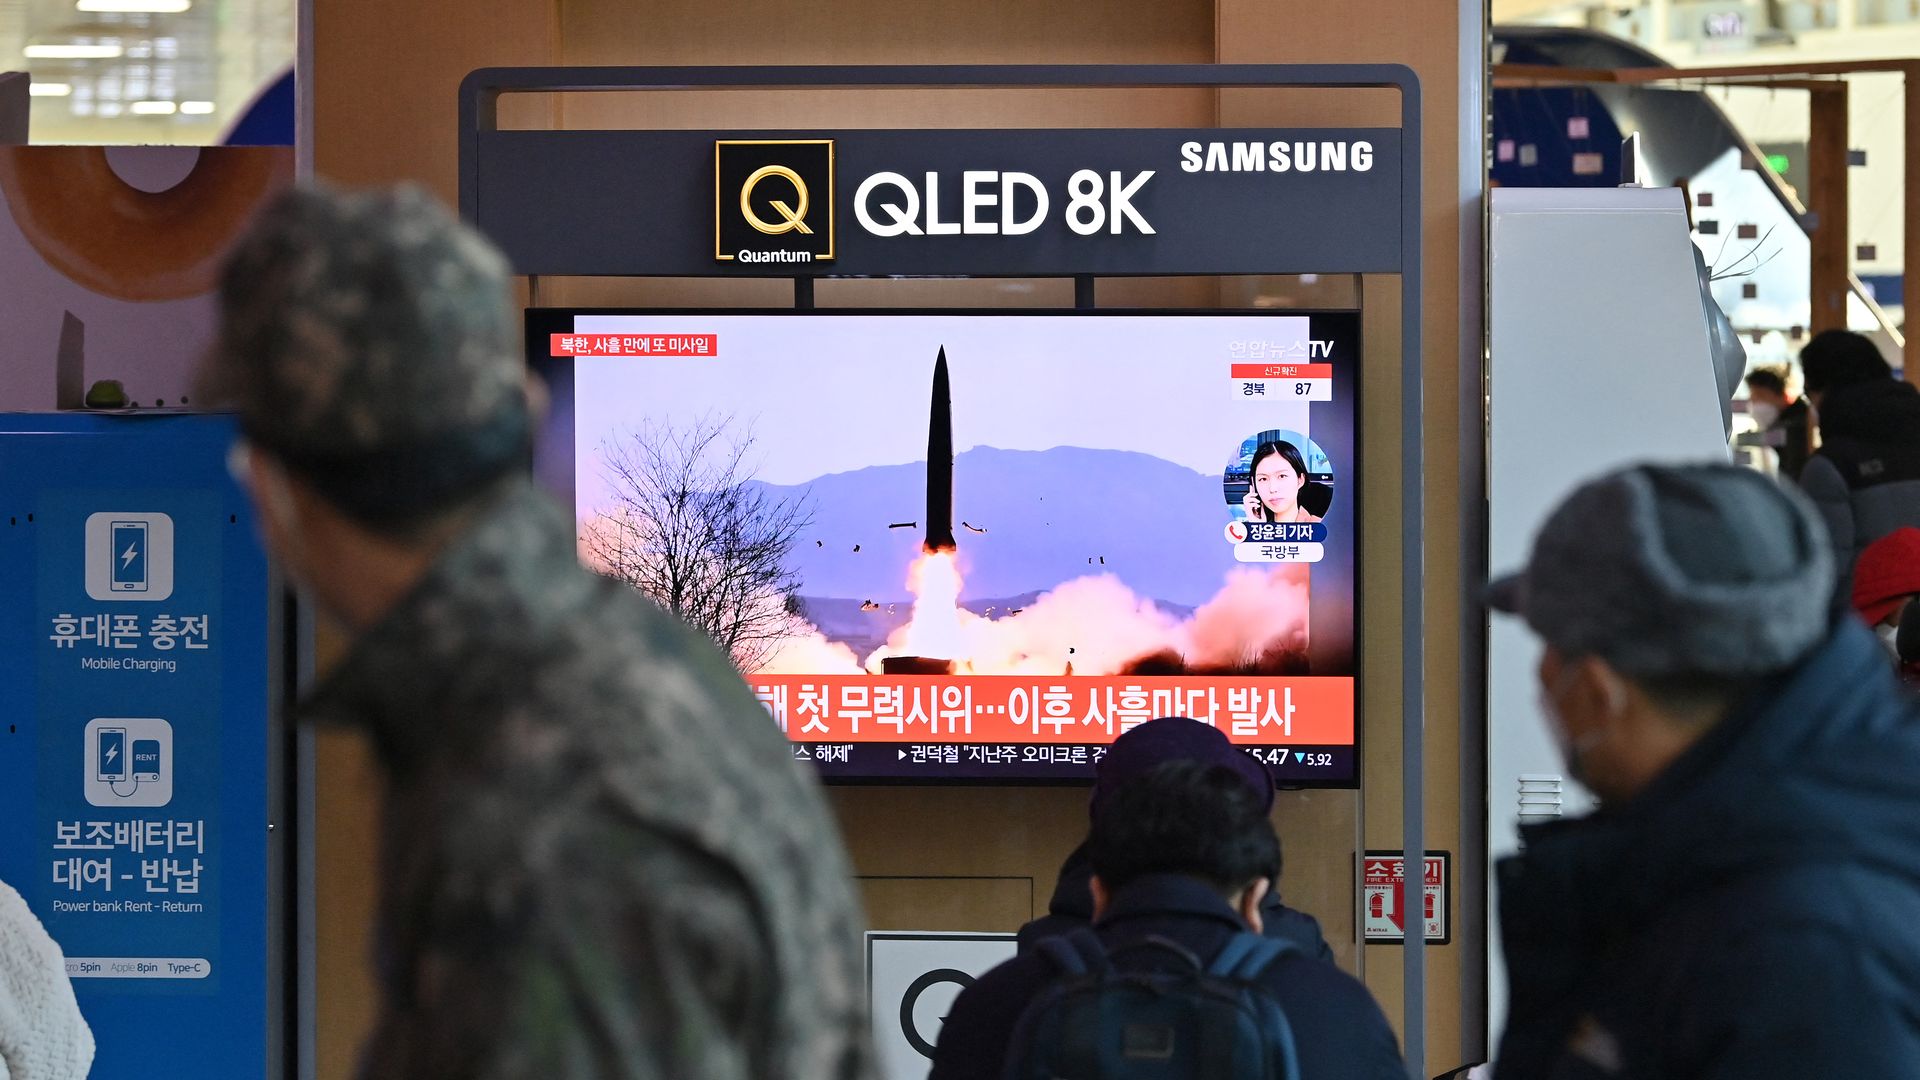 People watch a television screen showing a news broadcast with file footage of a North Korean missile test, at a railway station in Seoul on January 17.